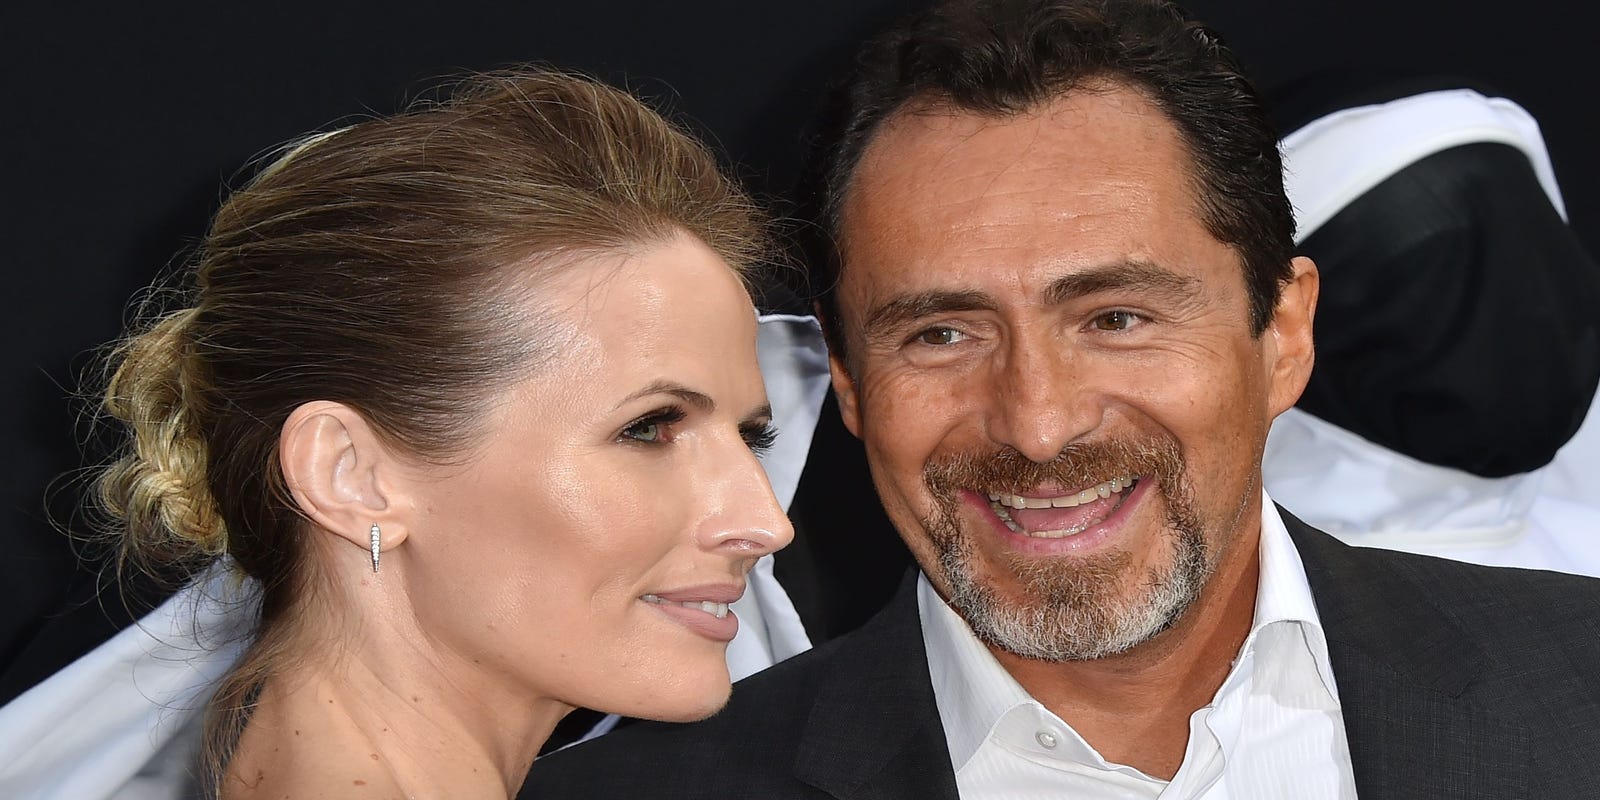 Cowboys And Indians Porn Captions - Demian Bichir announces the death of his wife on Instagram